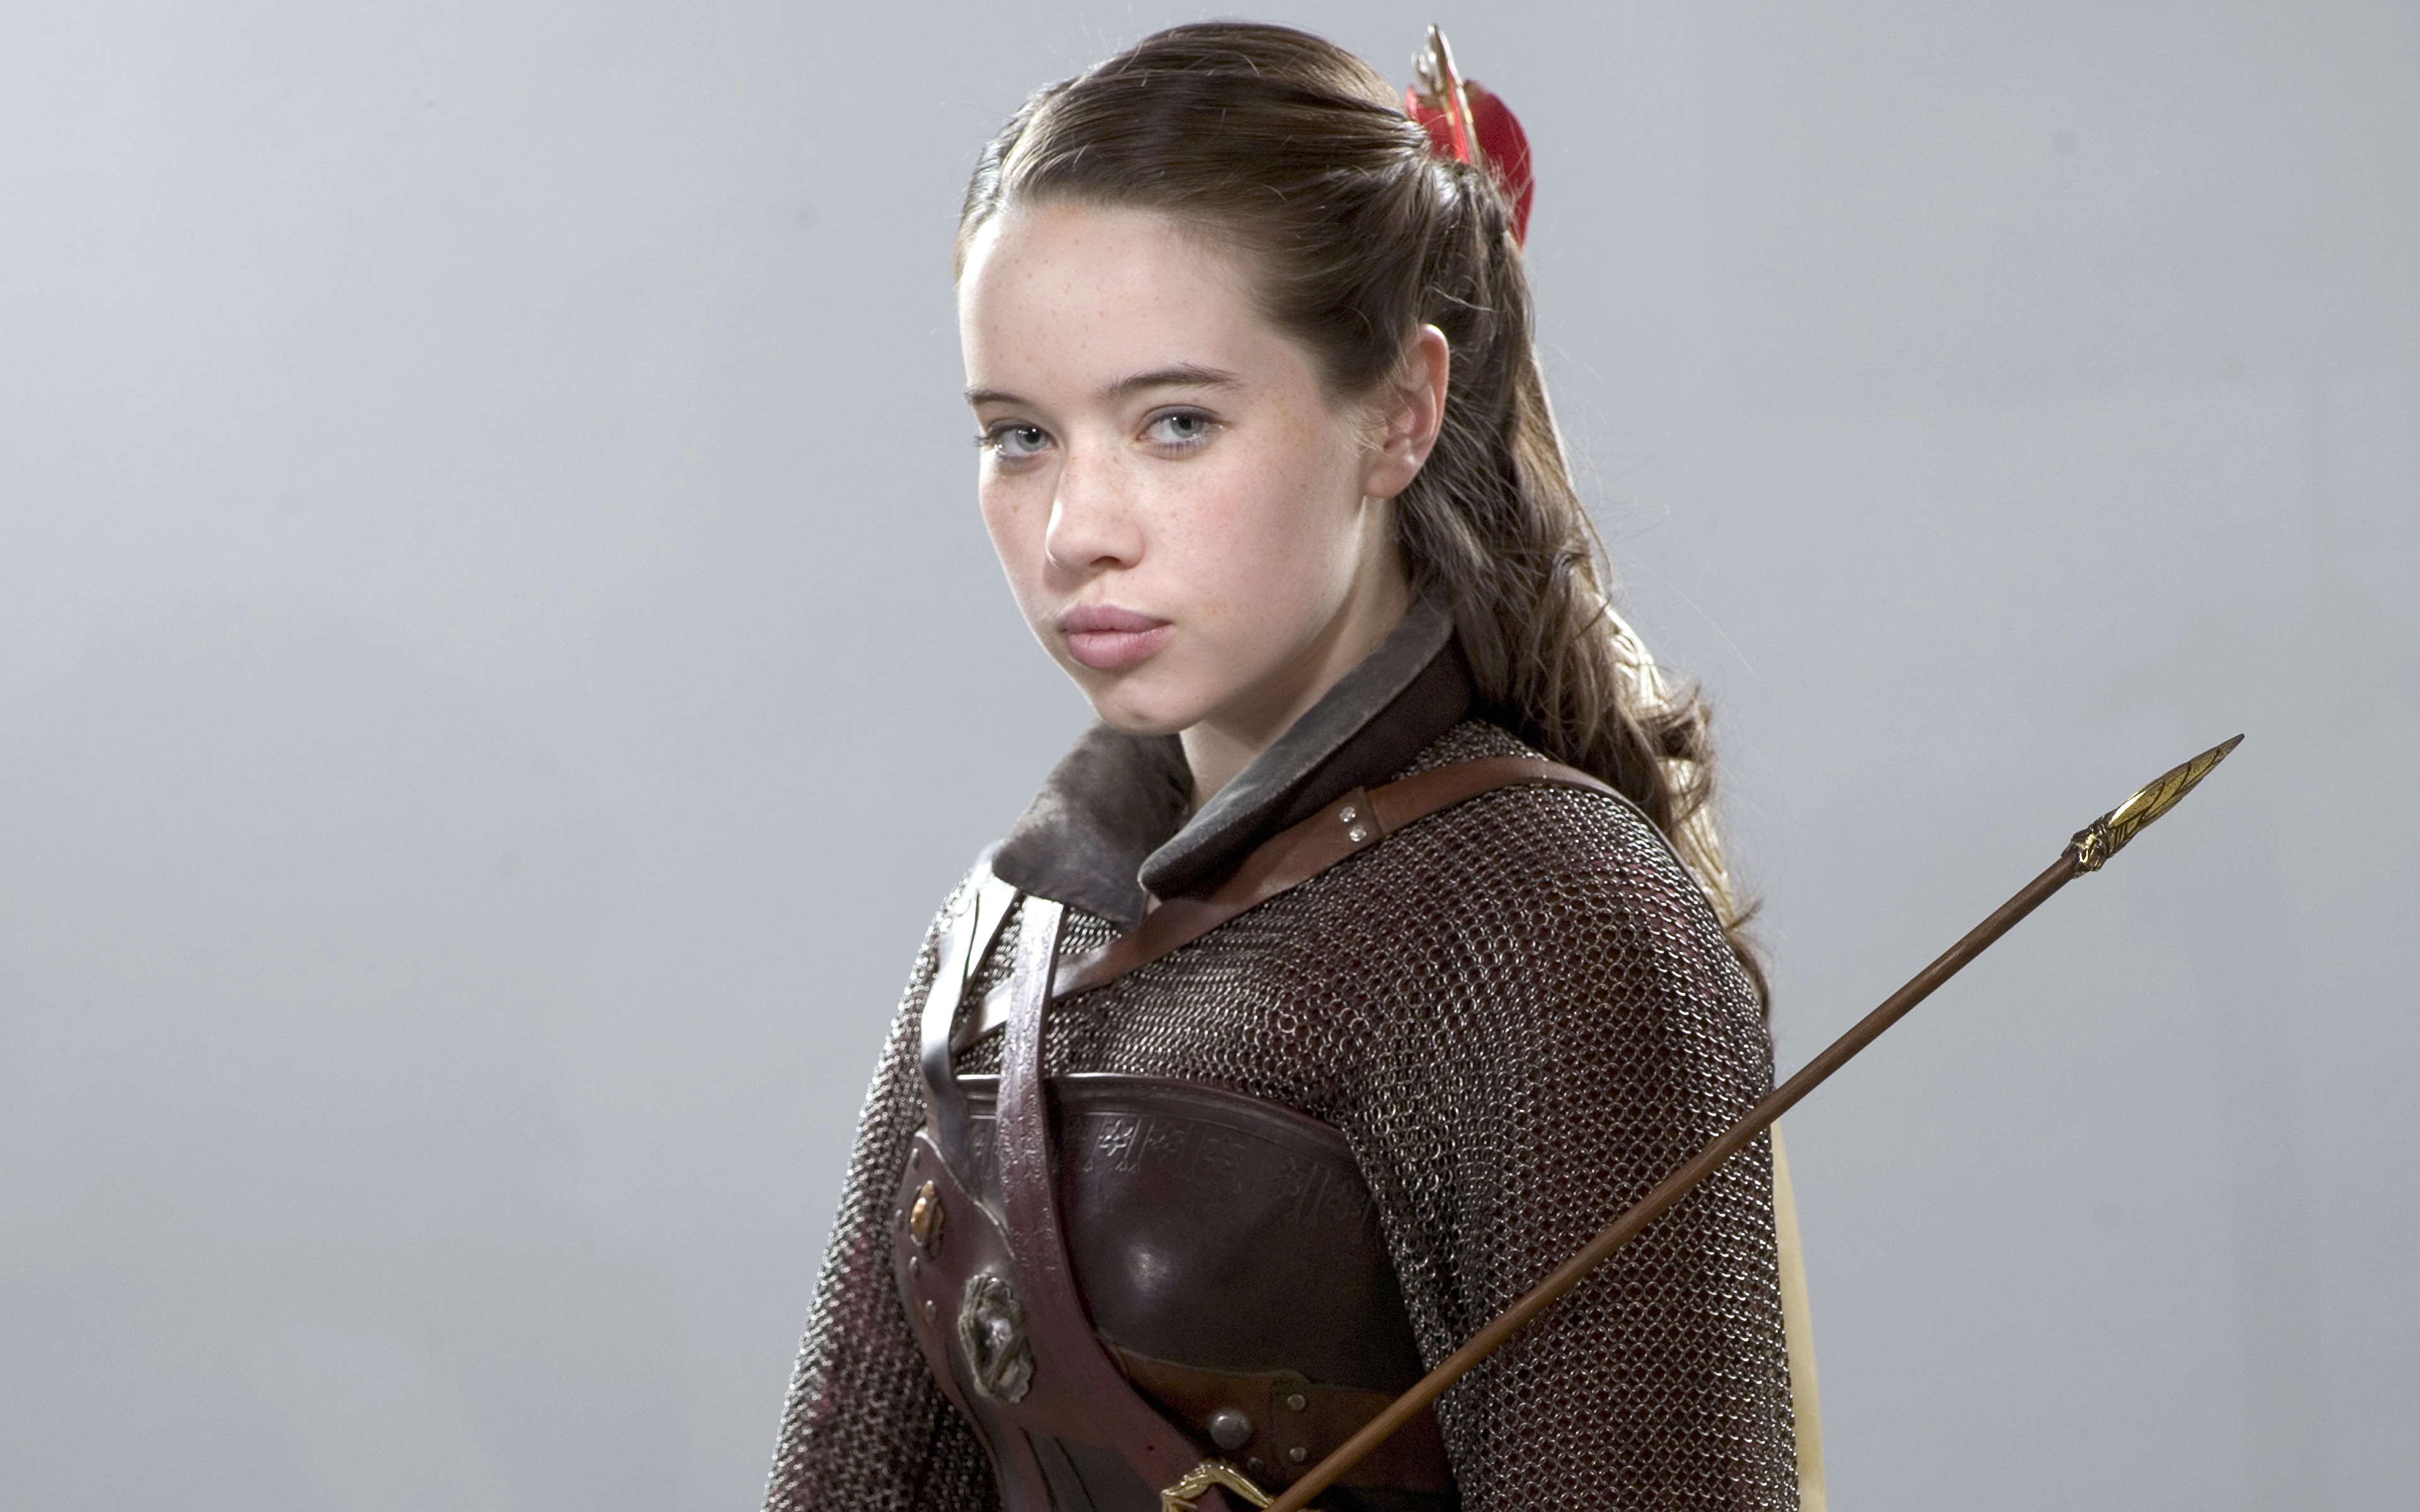 Desktop Wallpapers Armor Anna Popplewell young woman 3840x2400